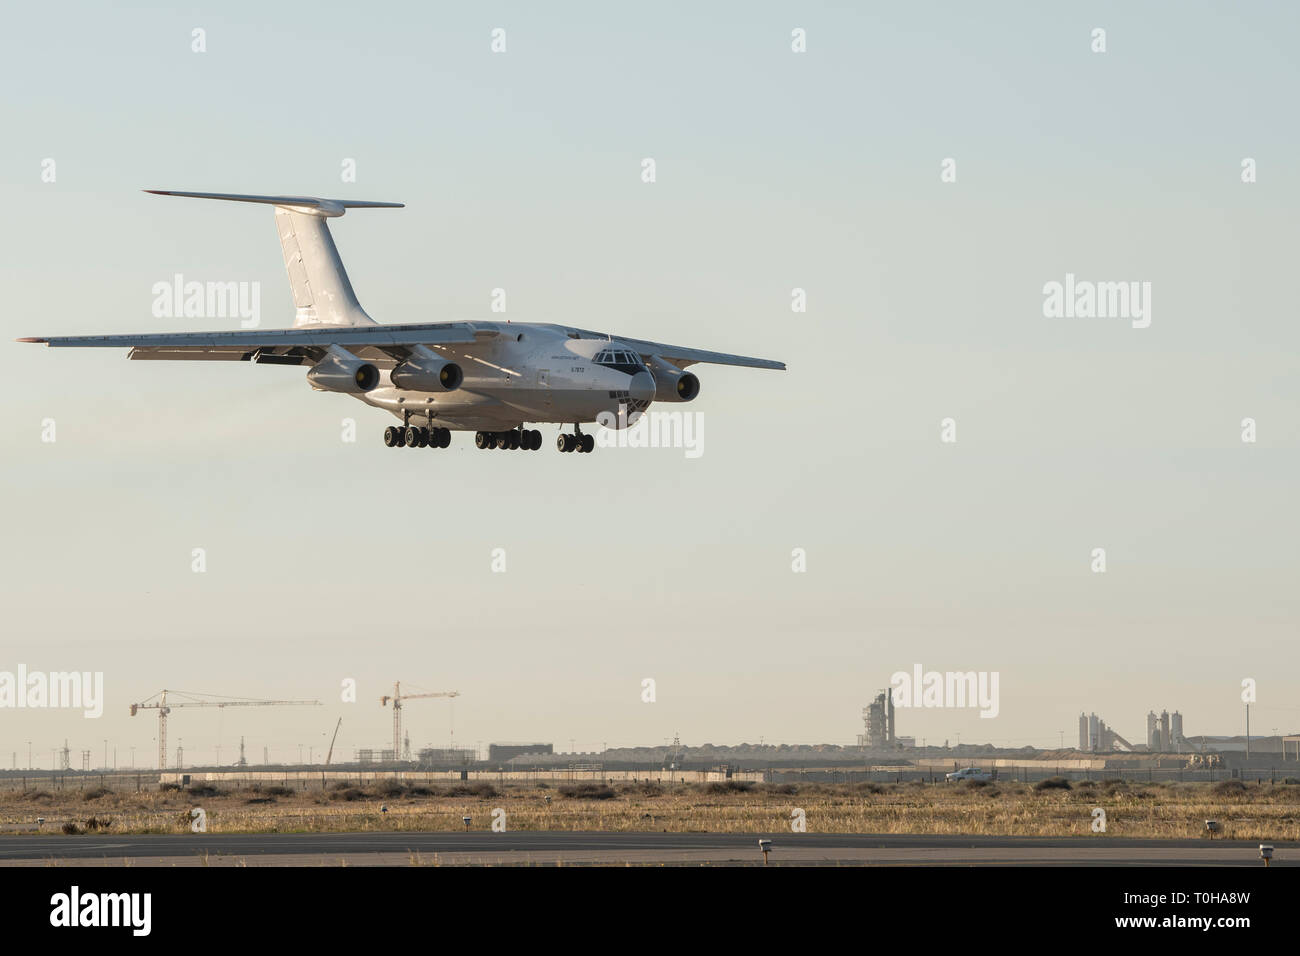 An Ilyushin Il-76 prepares to land at Ali Al Salem Air Base, Kuwait, March 11, 2019. The U.S. Air Forces Central Command’s Air Mobility Division and Airlift Control Team orchestrate the utilization of commercial international heavyweight air tenders to move theater cargo providing the USCENTCOM theater an important airlift capability for cargo that cannot be load planned on military aircraft within the next 72 hours. This is the first time in more than two years the capability has been used at ASAB. (U.S. Air Force Photo/Tech. Sgt. Robert Cloys) Stock Photo